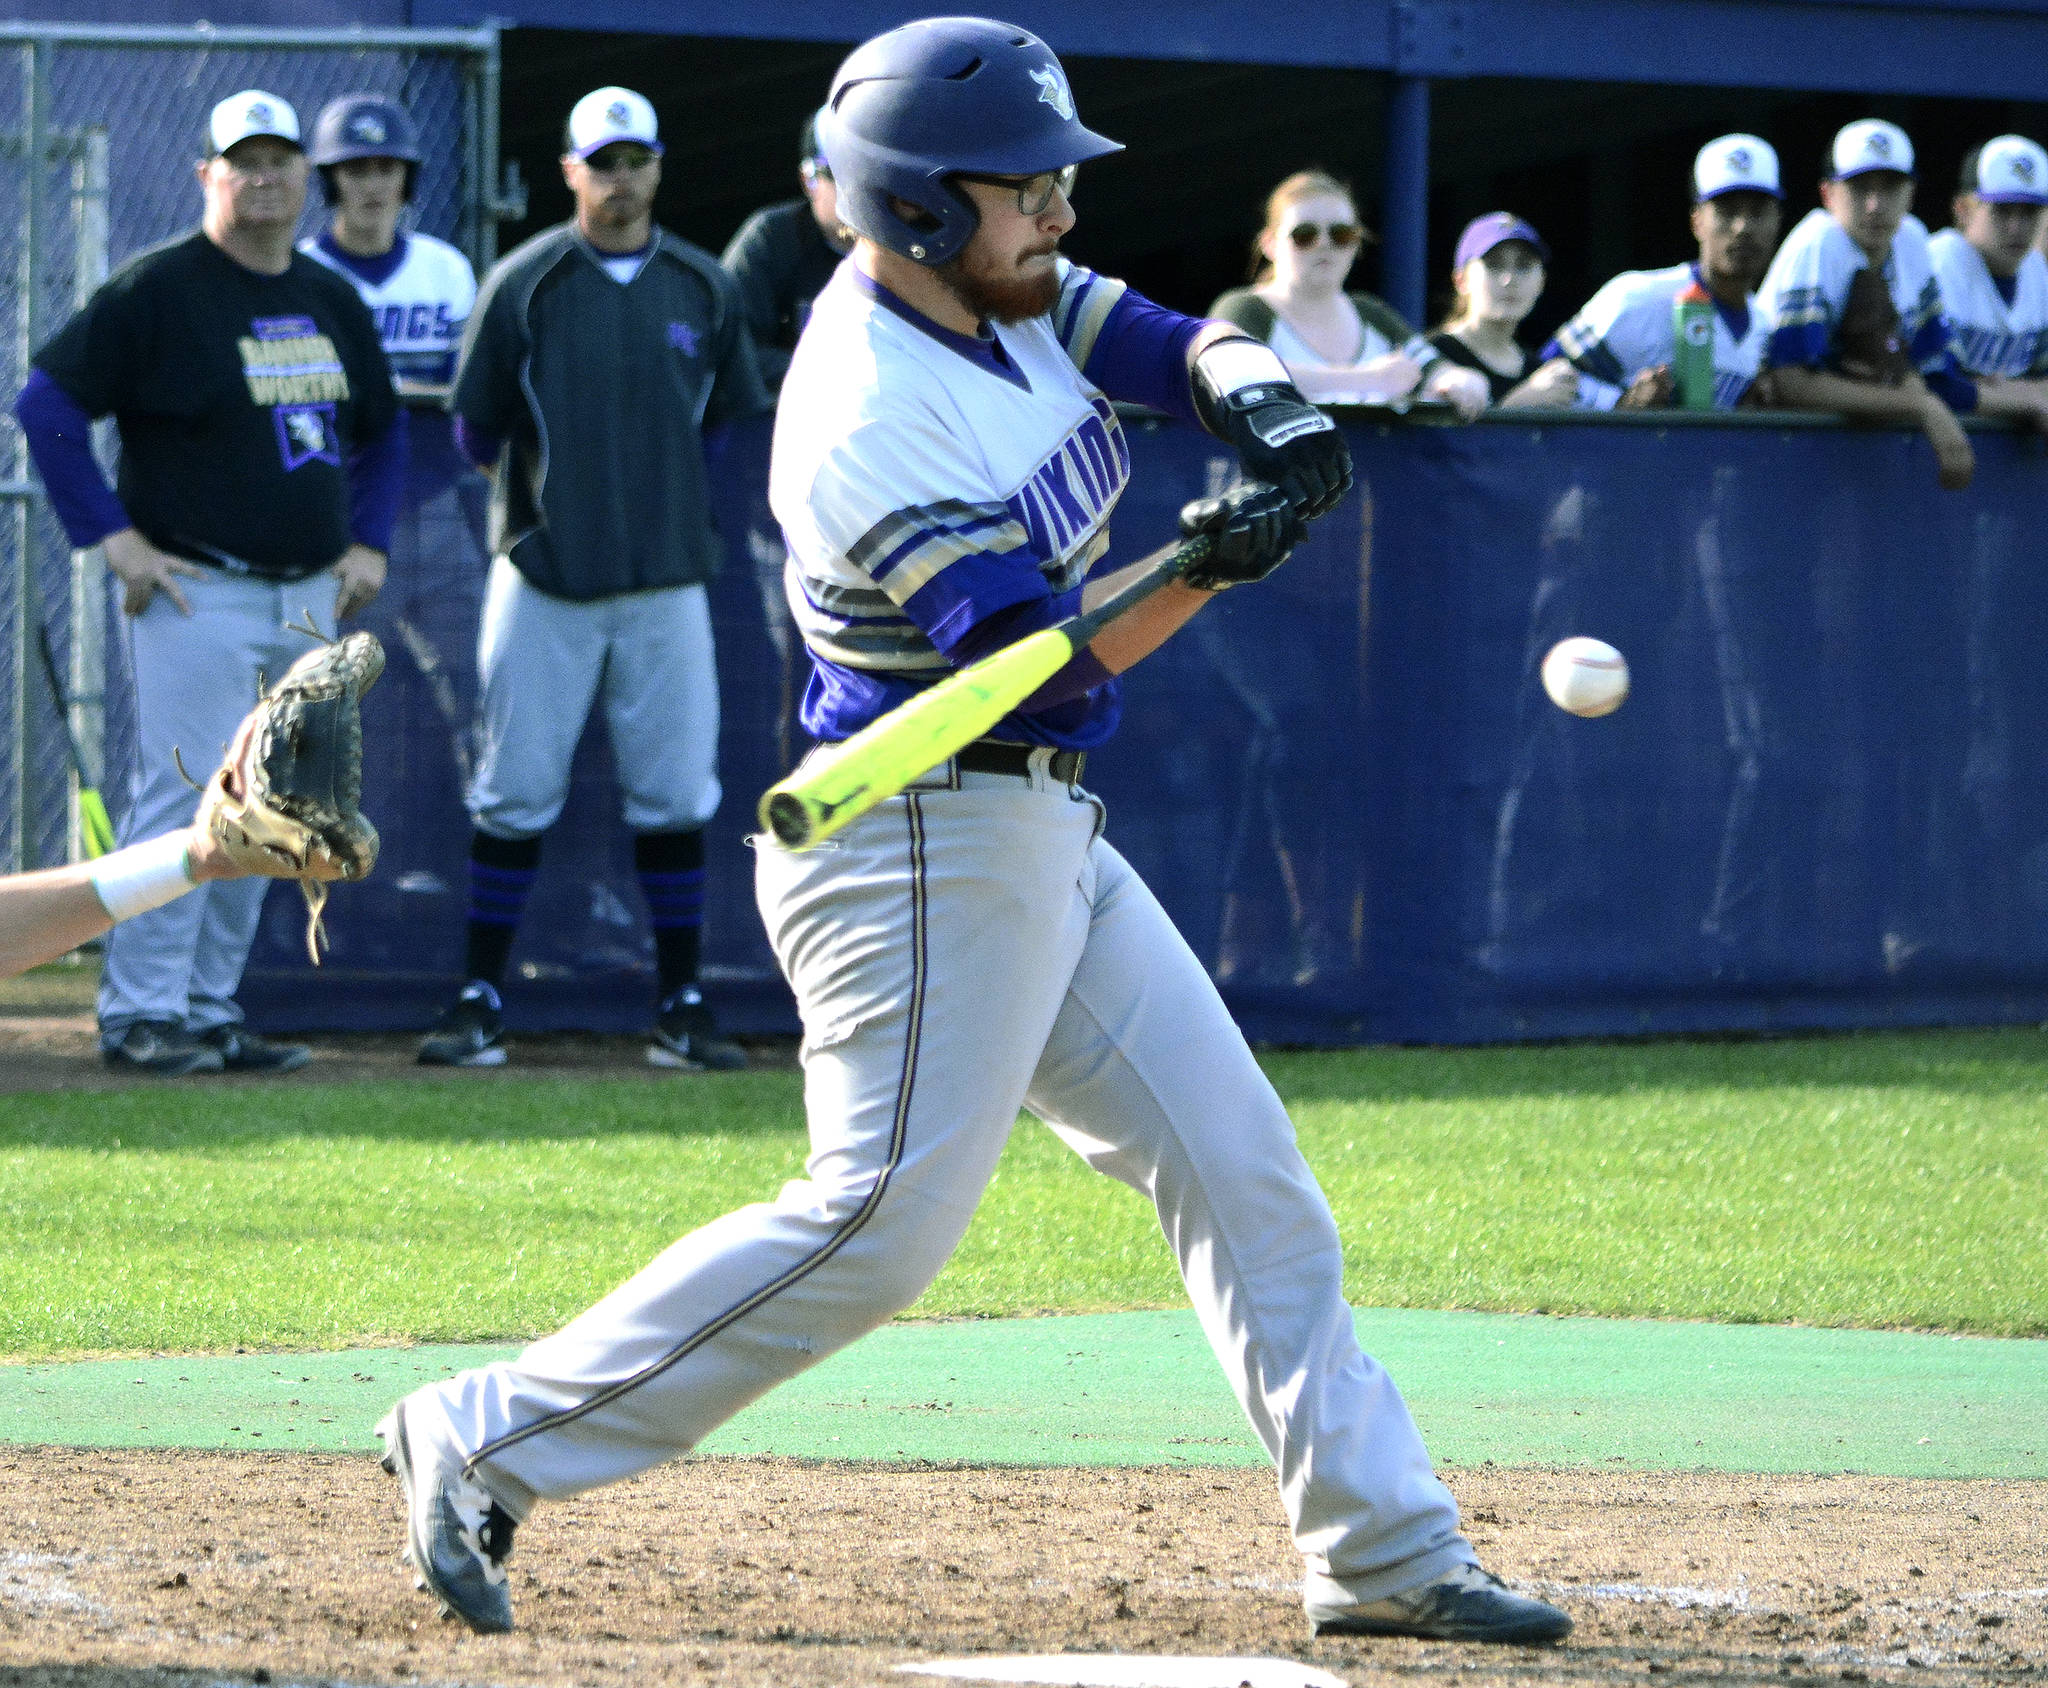 North Kitsap DH Tucker Gowin drove in two runs for the Vikings in the 5-4 loss to Port Angeles. (Mark Krulish/Kitsap News Group)